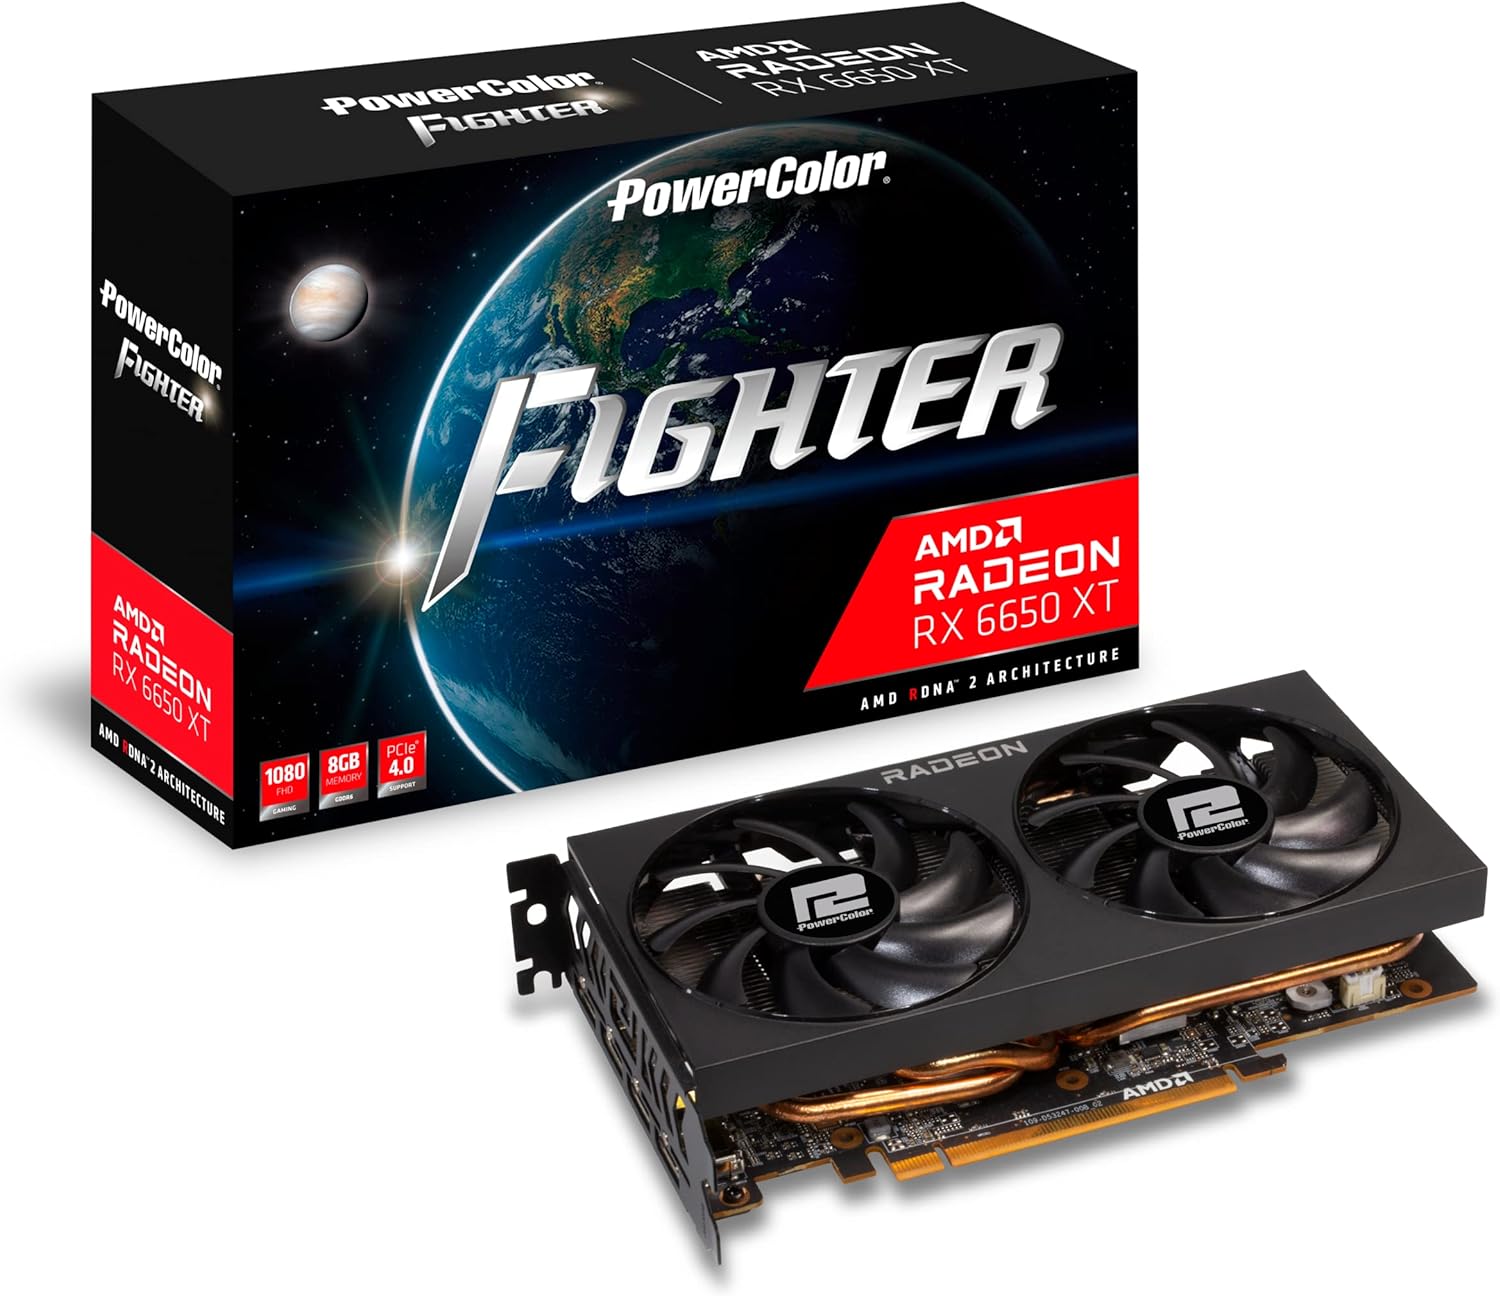 PowerColor Fighter AMD Radeon RX 6700 XT Gaming Graphics Card with 12GB GDDR6 Memory, Powered by AMD RDNA 2, Raytracing, PCI Express 4.0, HDMI 2.1, AMD Infinity Cache